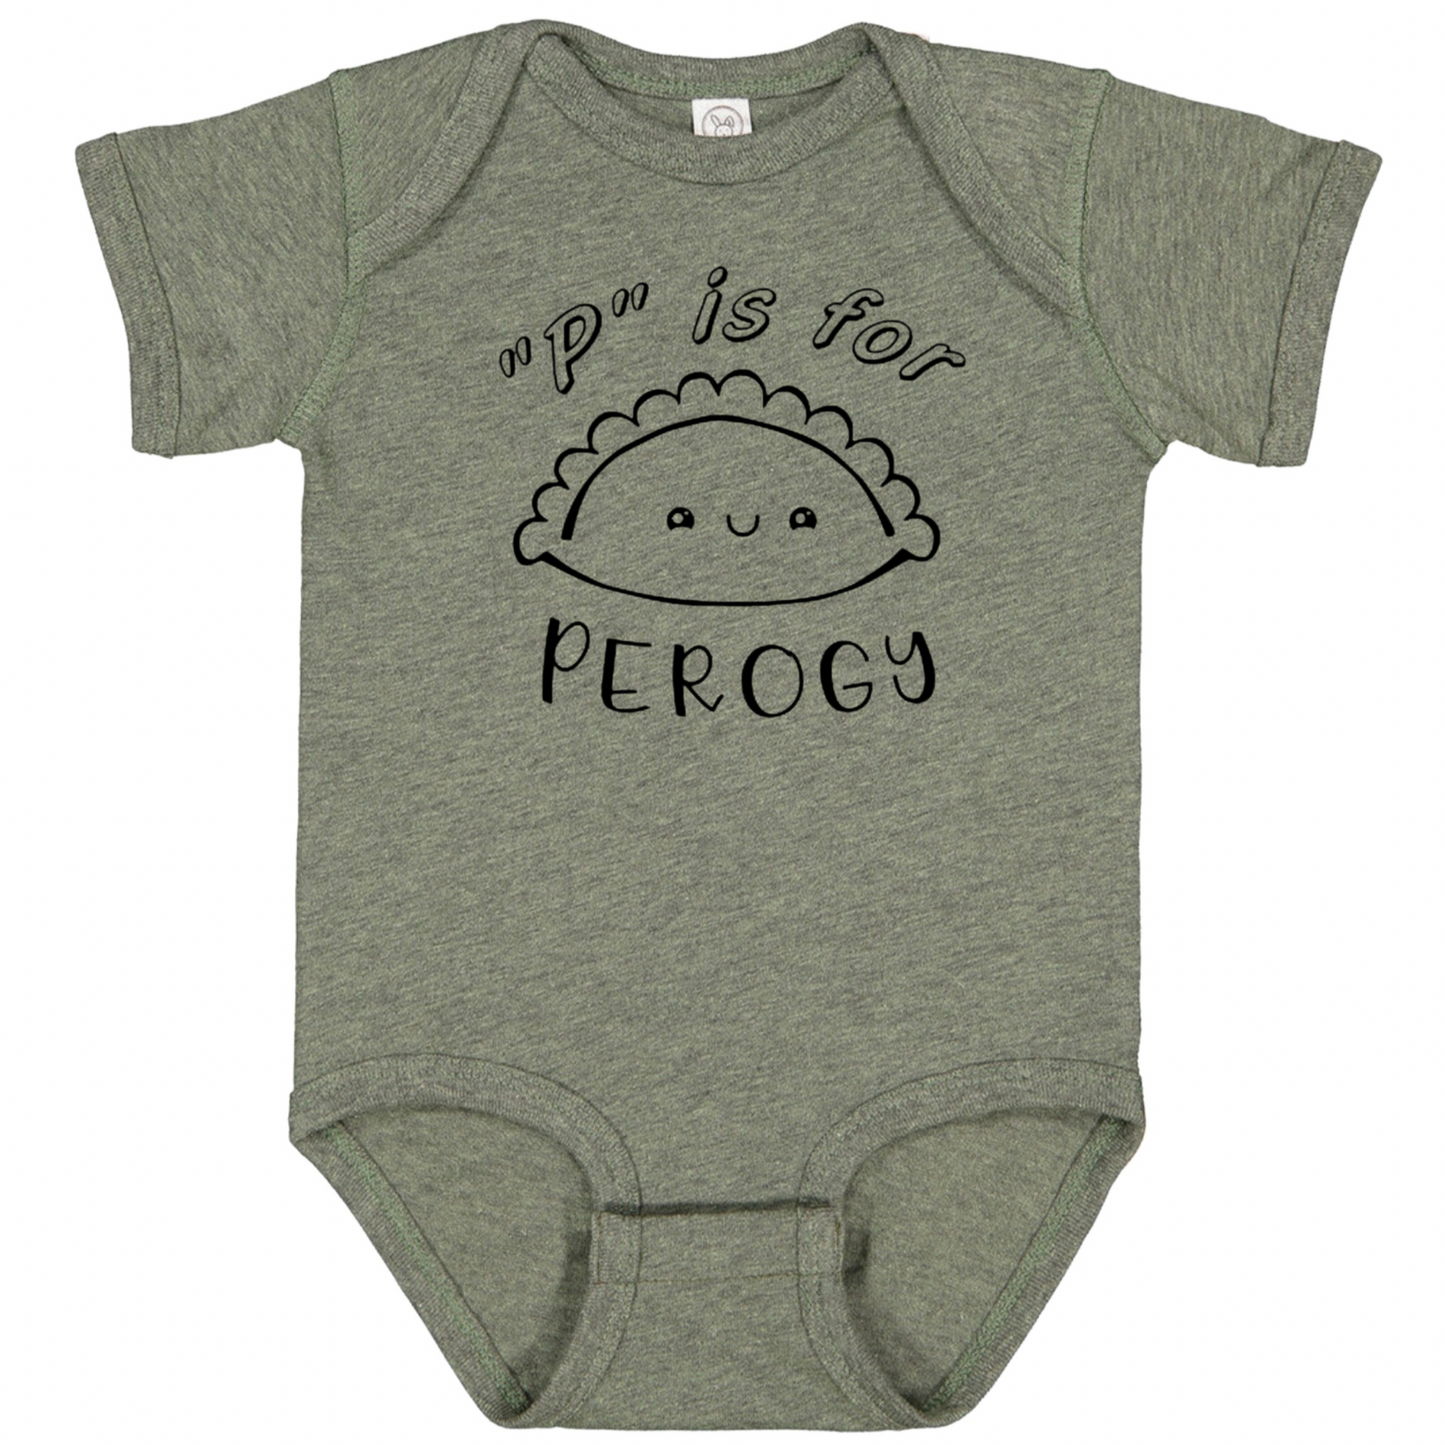 “P” IS FOR PEROGY(Black Font) - Short Sleeve Onesie